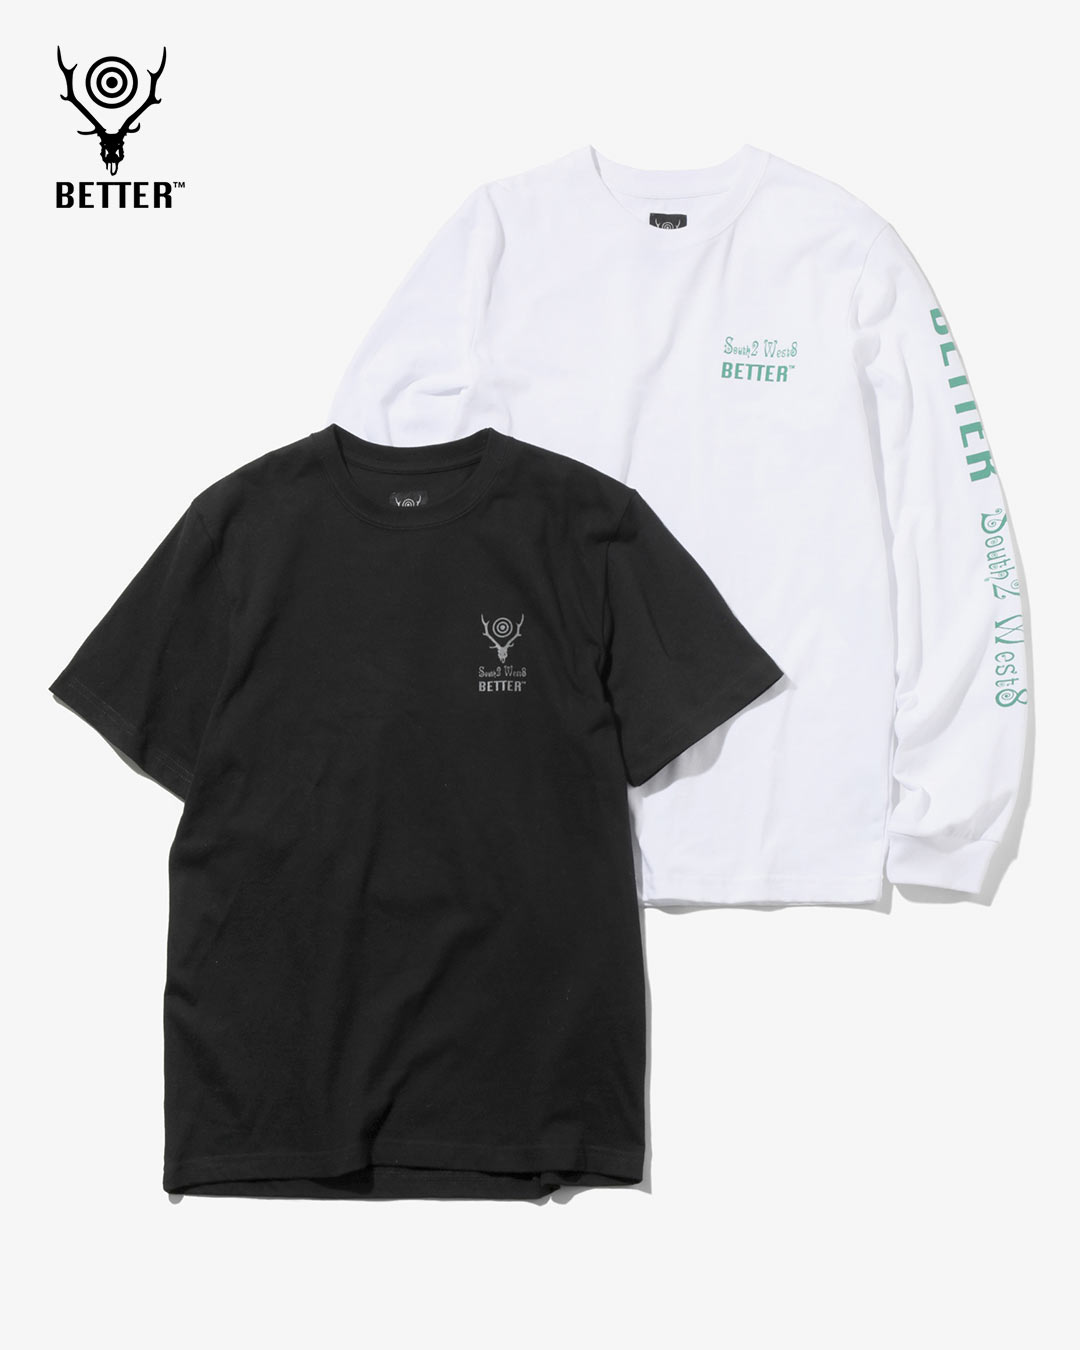 〈SOUTH2 WEST8〉 x〈BETTER™️ GIFT SHOP〉